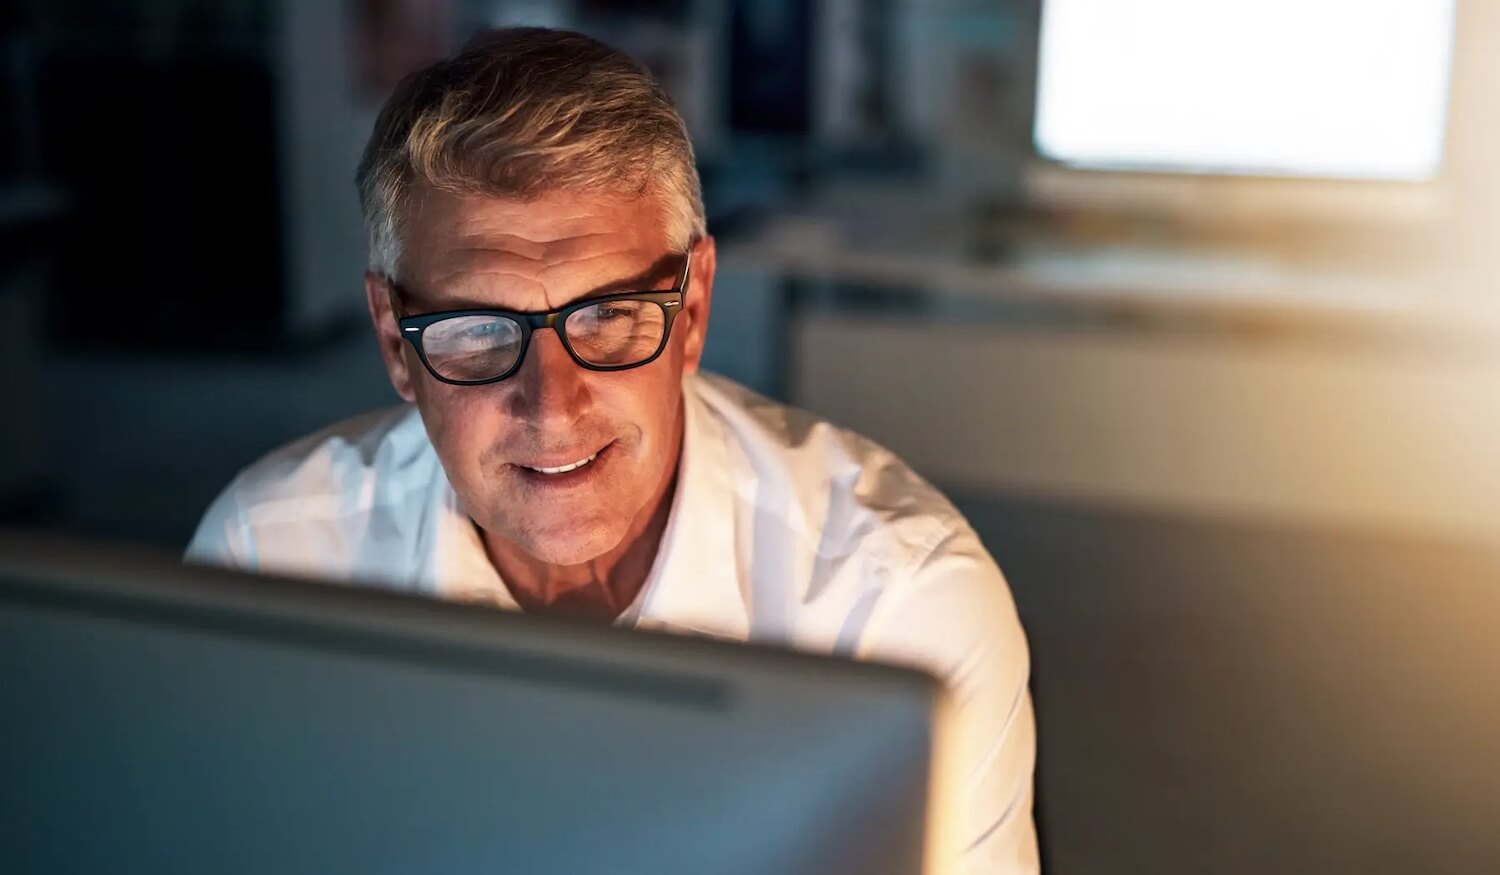 Man sitting at computer at night smiling at screen with secure email